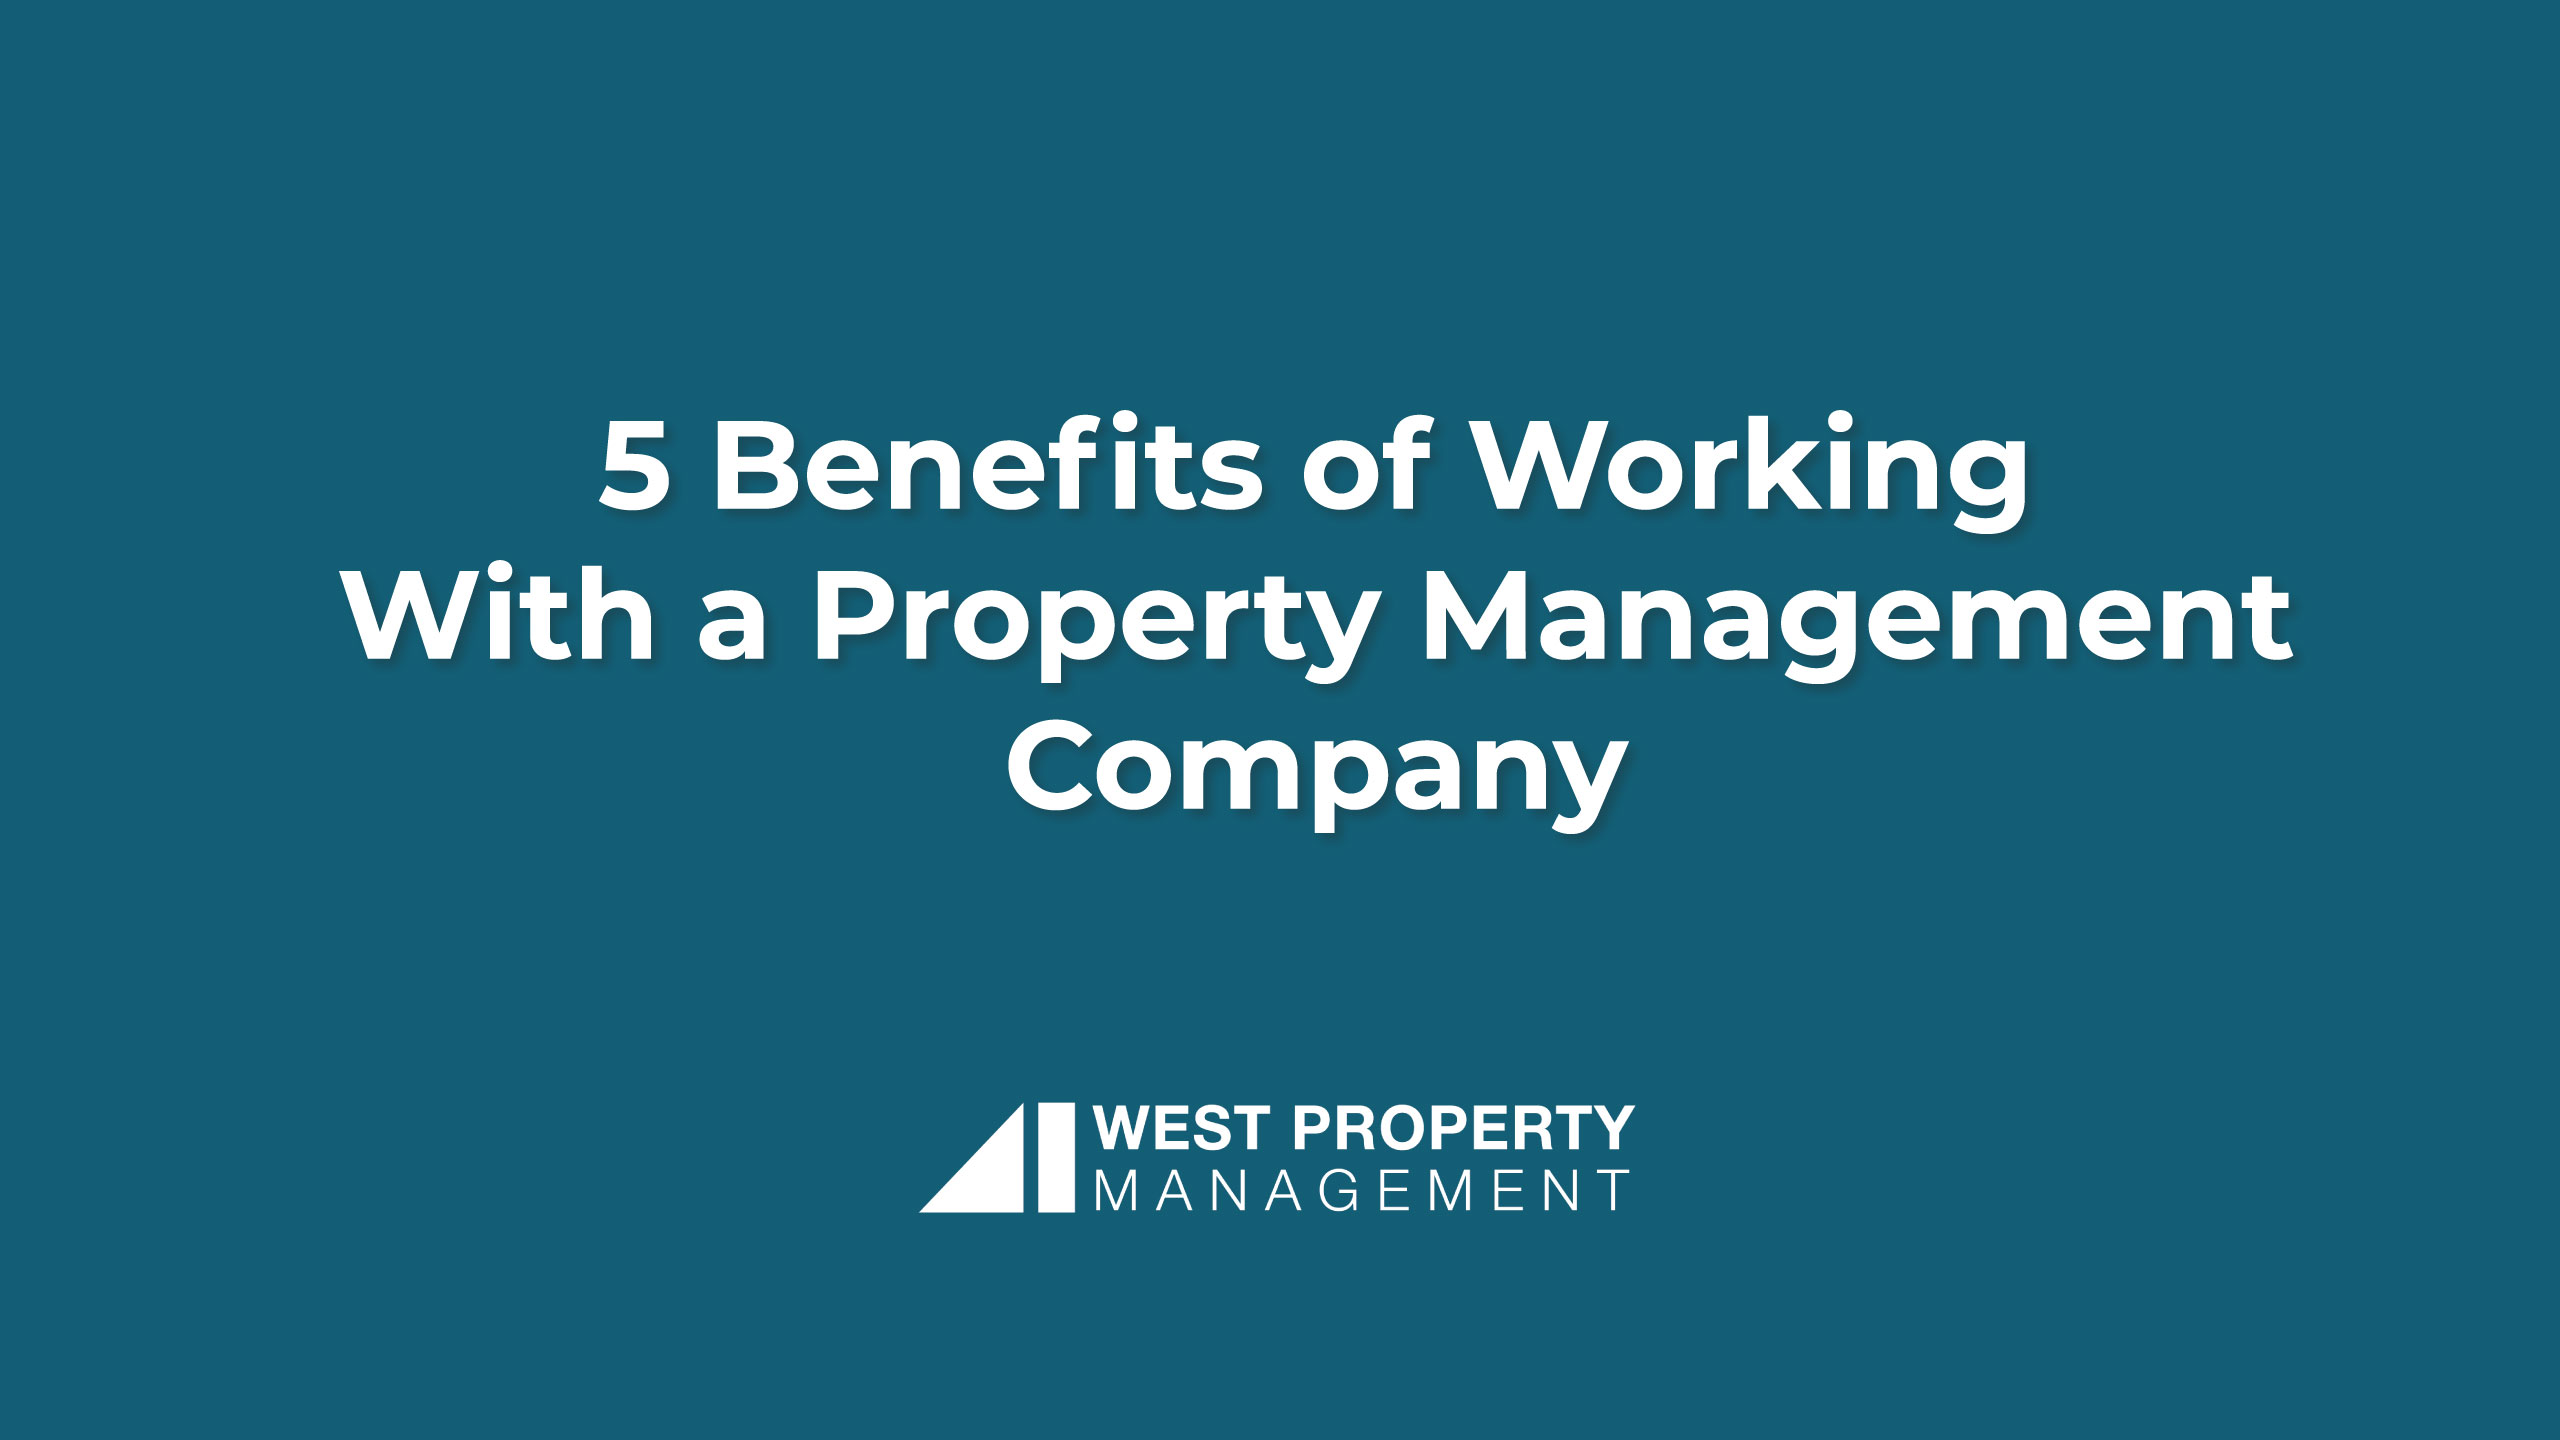 5 Benefits of Working With a Property Management Company